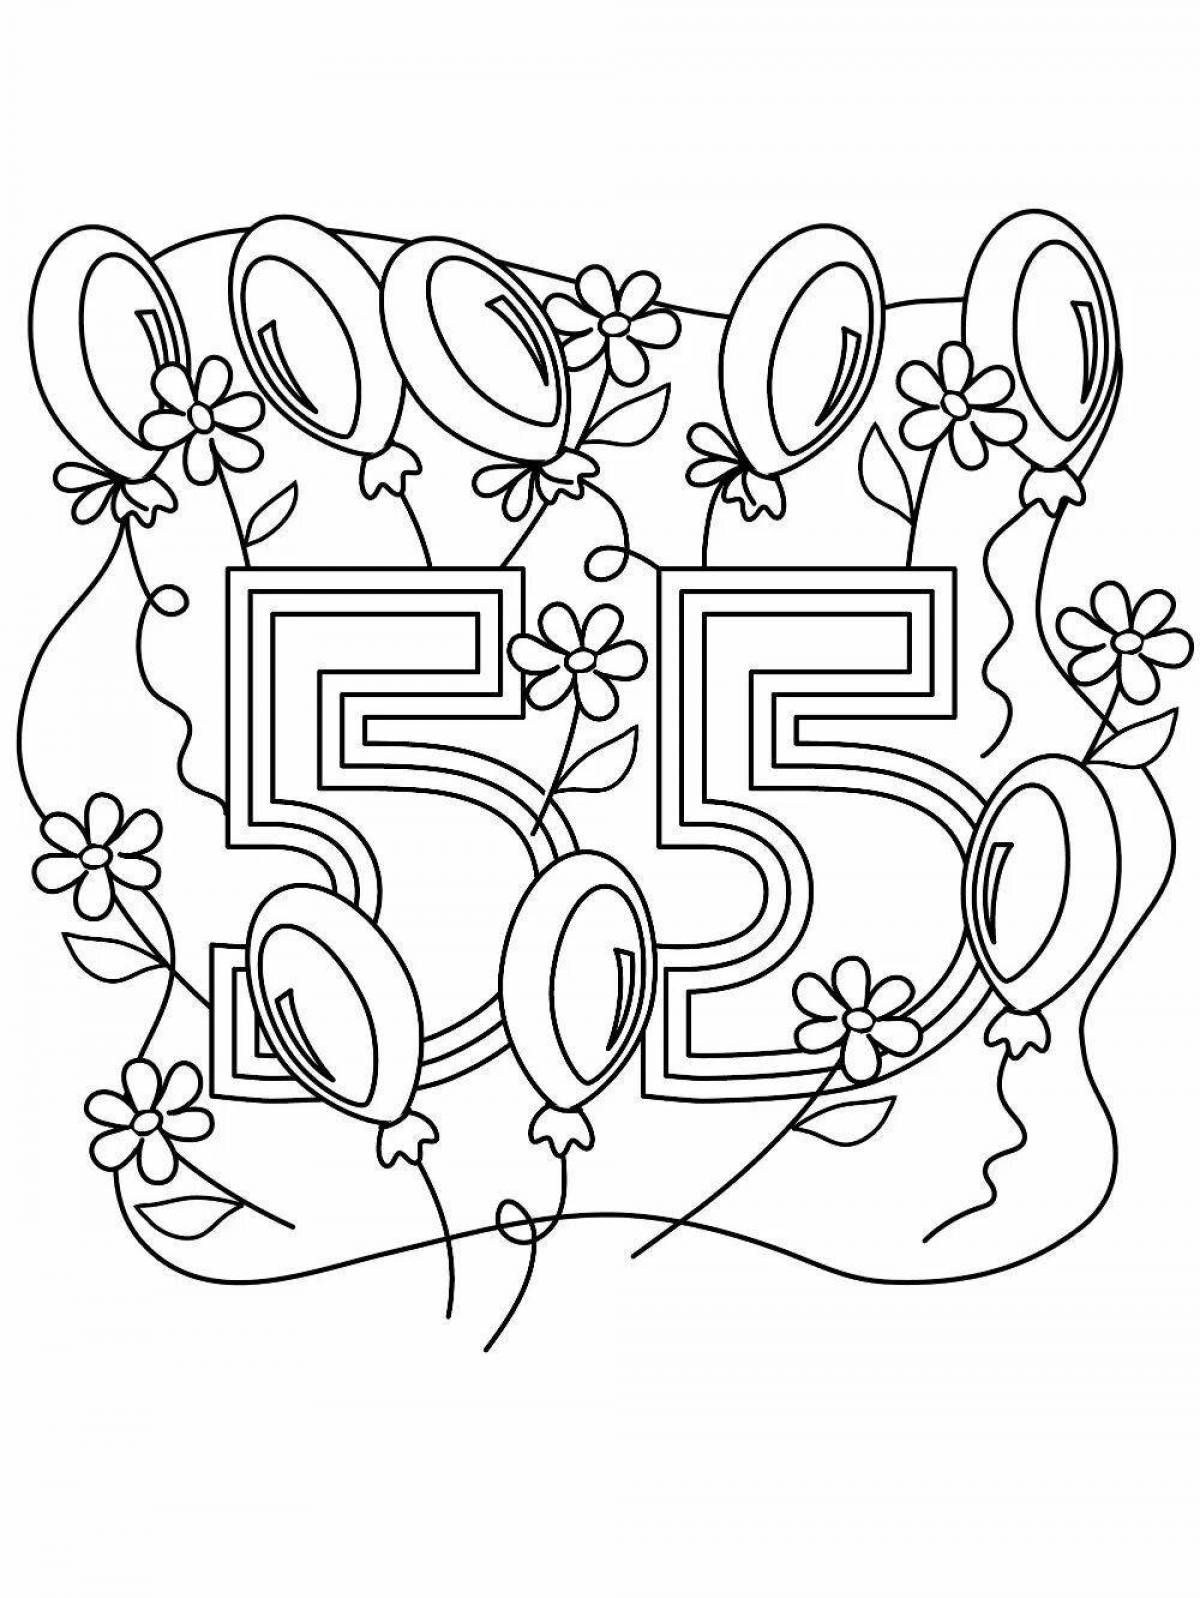 Happy Birthday Gorgeous School Coloring Page